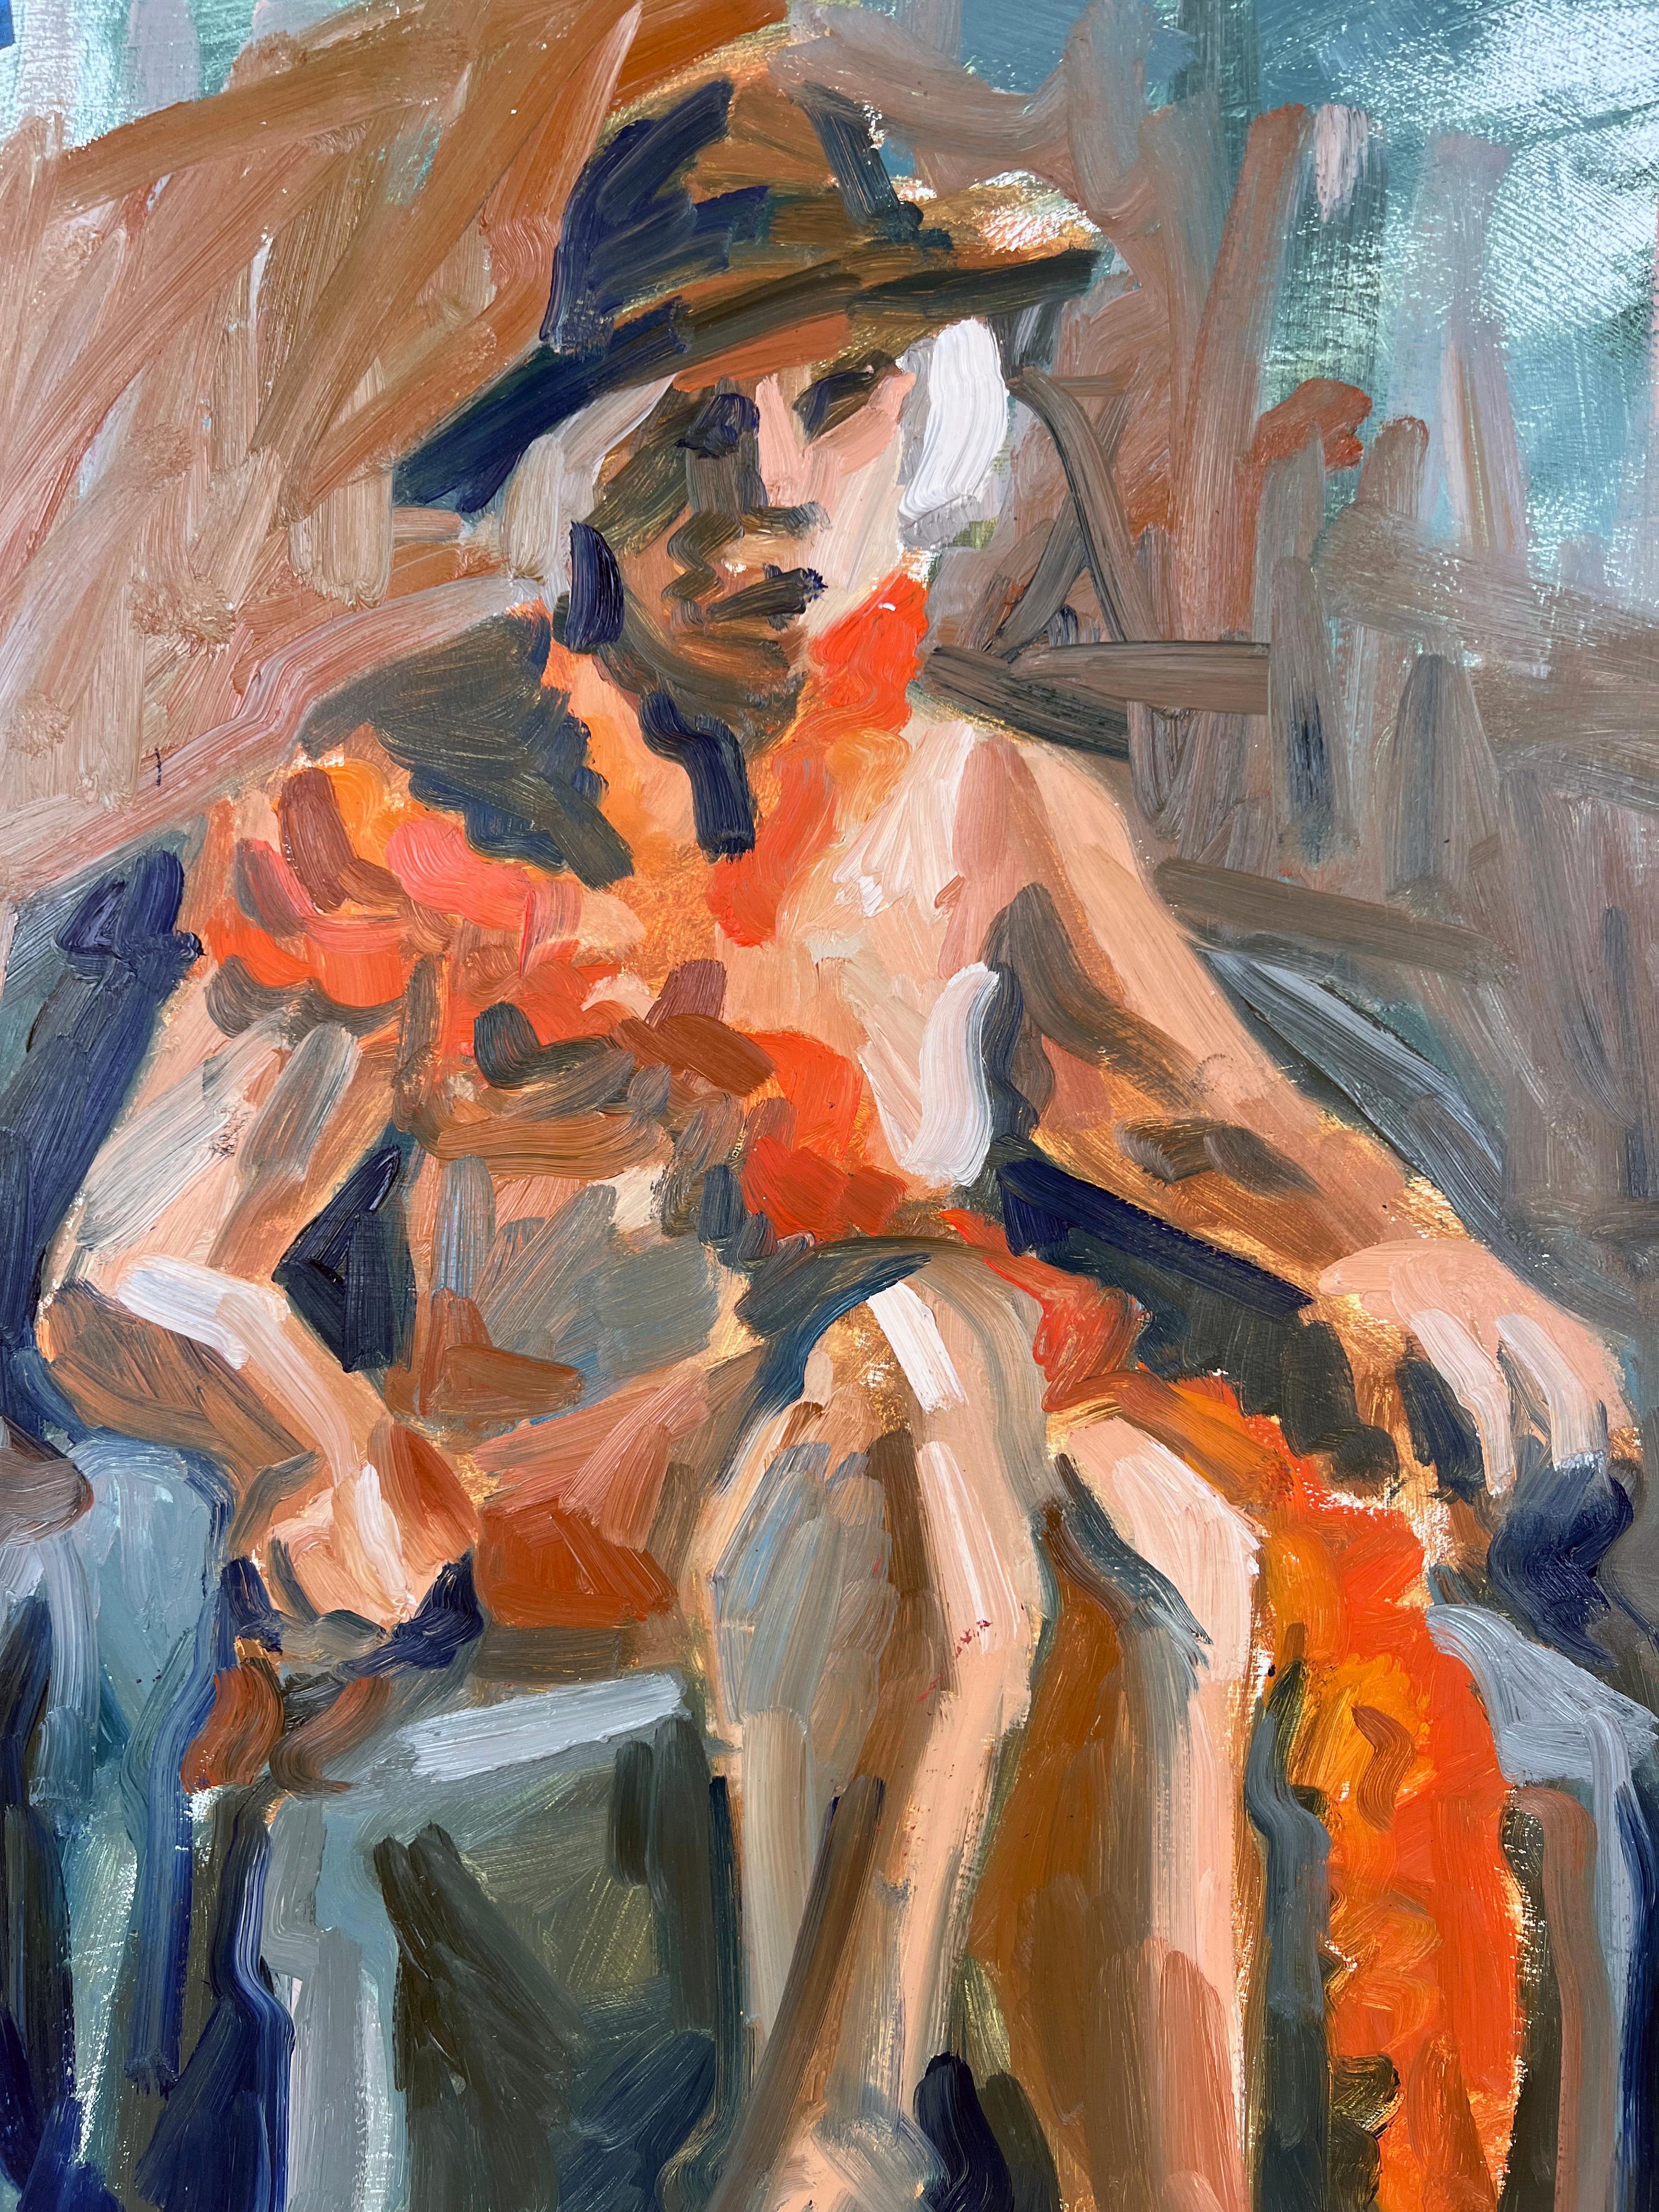 Seated Nude Woman Bay Area Figurative School Abstract Expressionist - Painting by Heather Speck